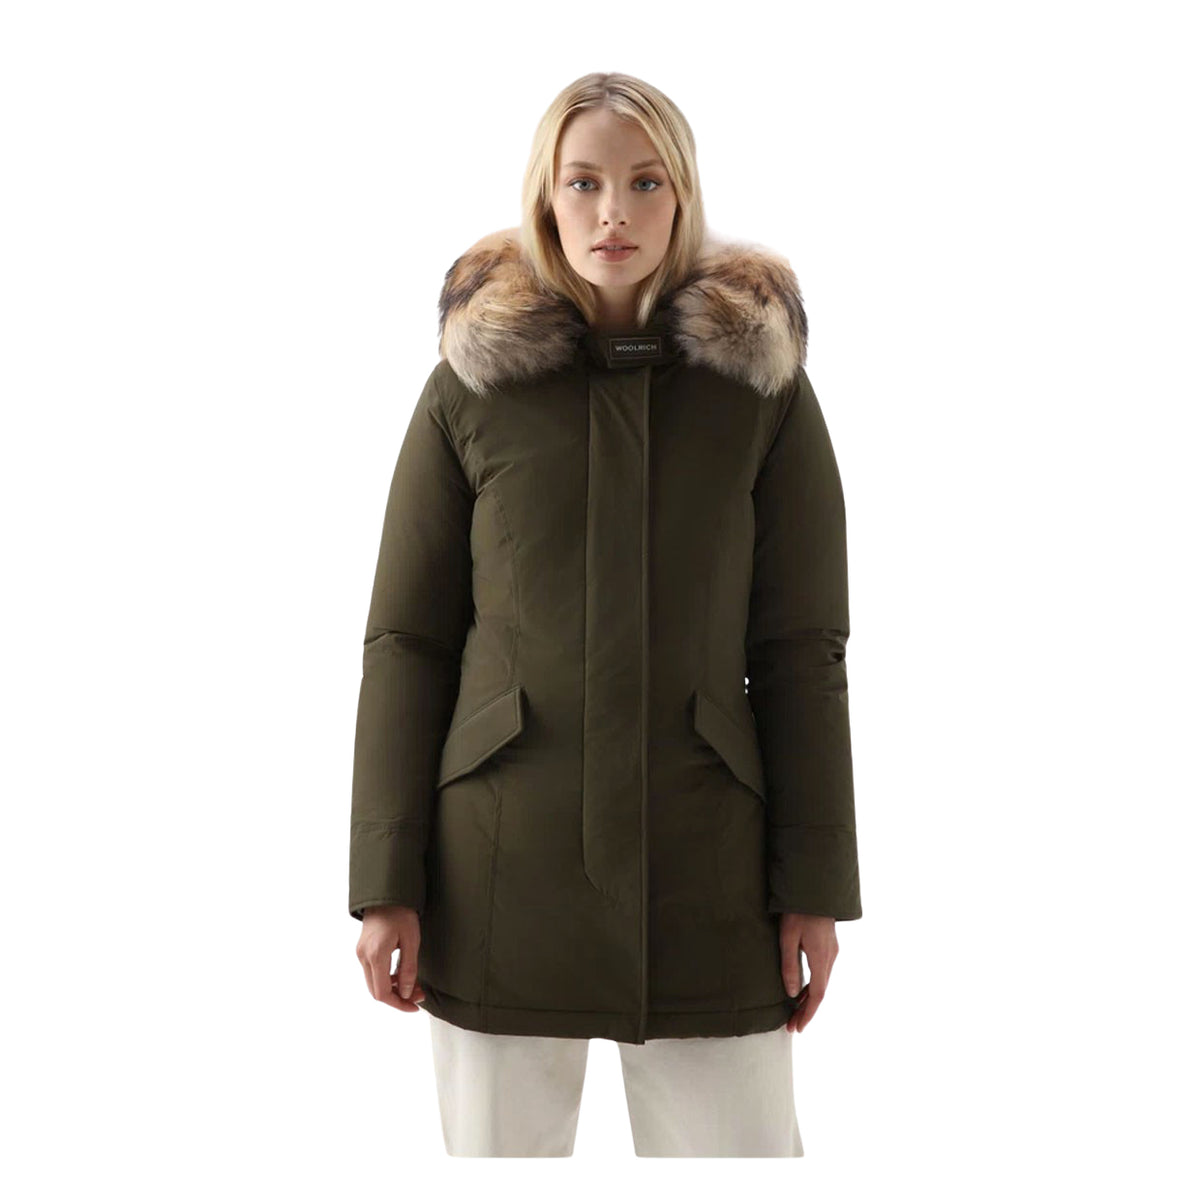 Woolrich Arctic Parka Luxury Women's Jacket with Removable Green